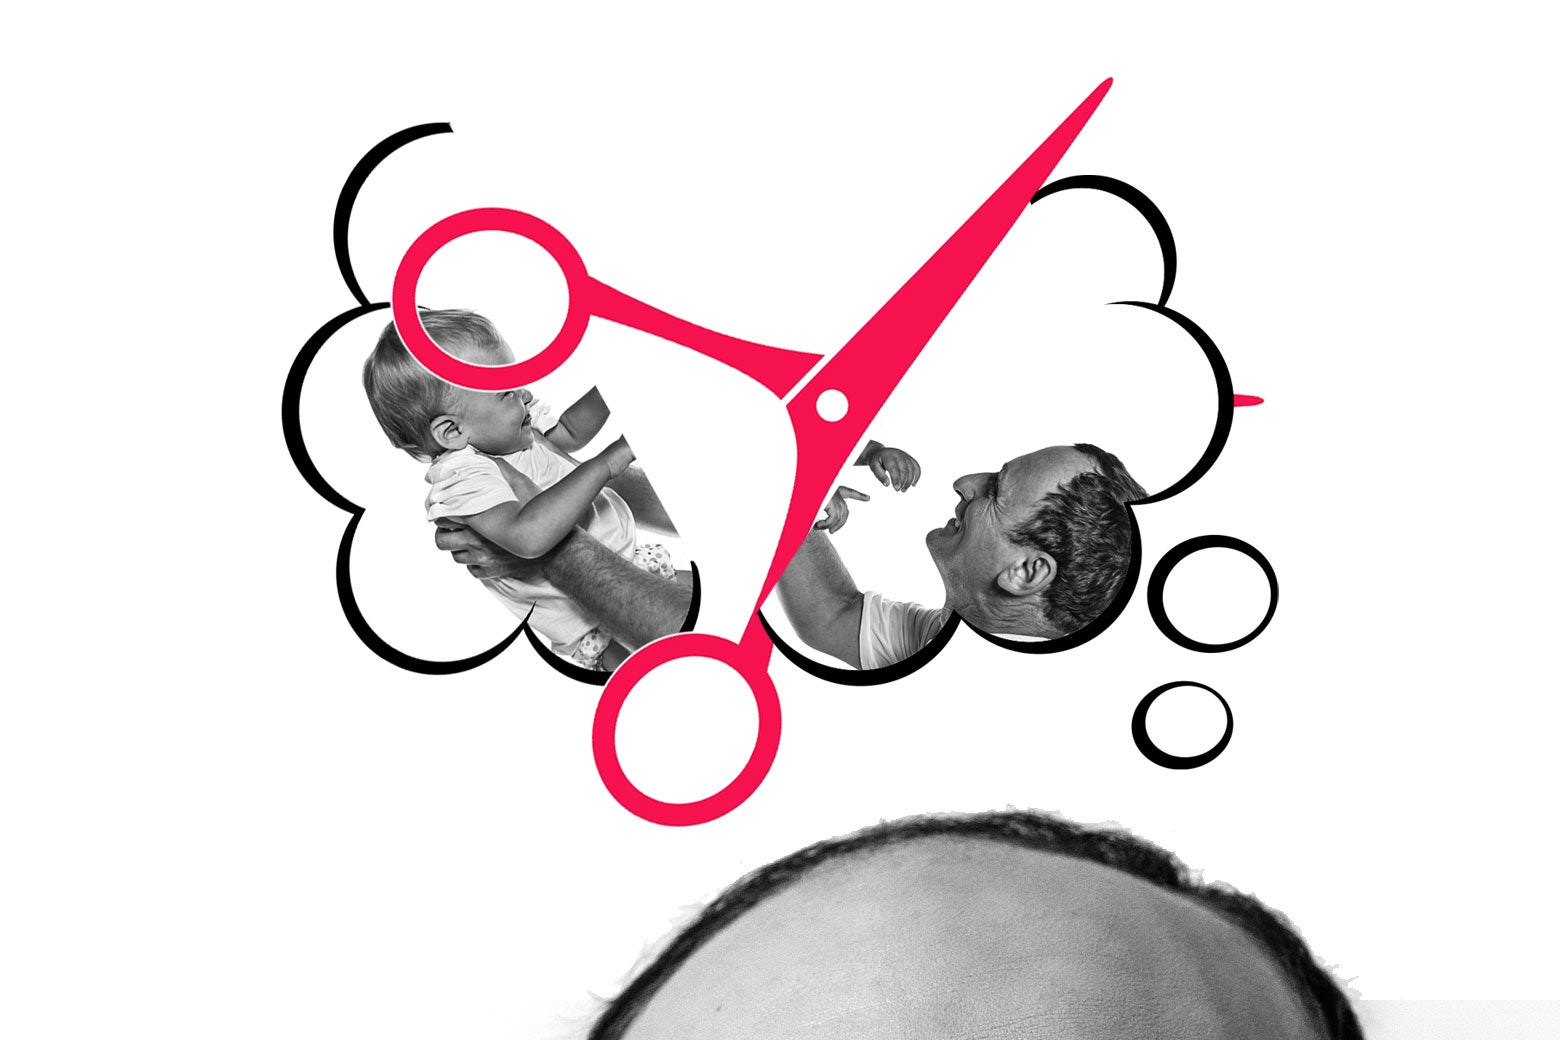 Thought bubble over a man's head. The thought bubble has an image of a baby and dad being torn apart by scissors.